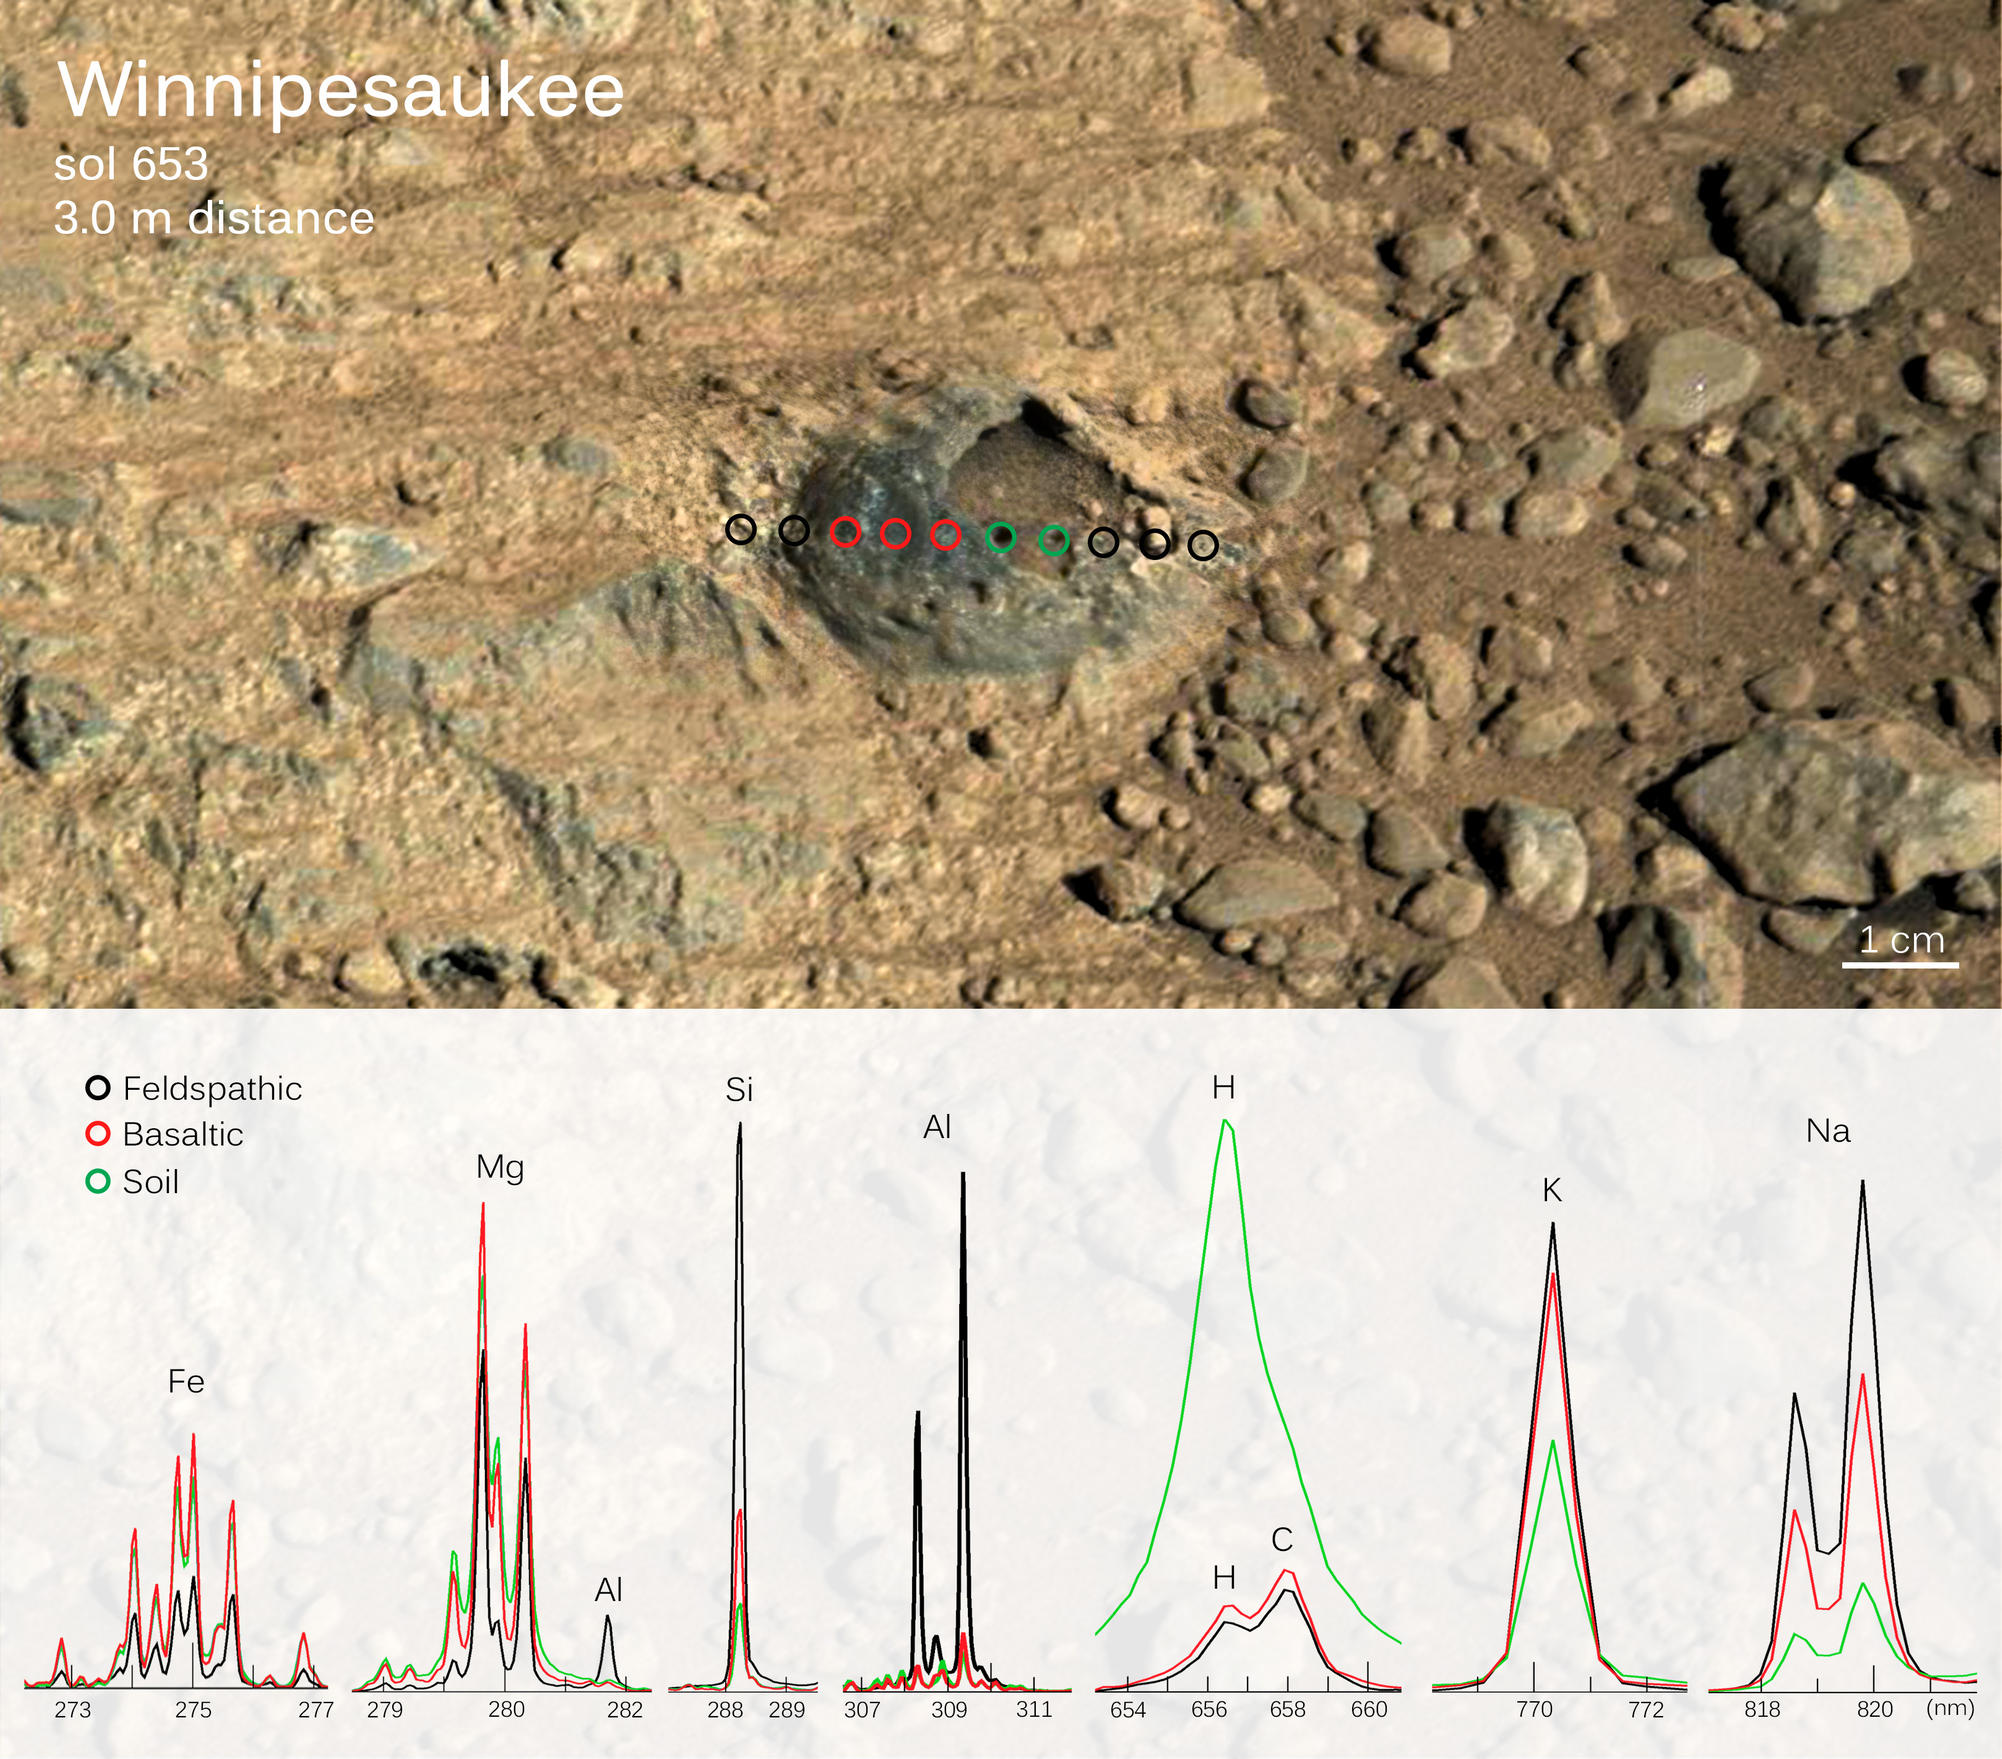 Scientists used the ChemCam instrument on NASA's Curiosity Mars rover to examine a Martian rock "shell" about one inch across, embedded in bedrock and with a hollow interior.  This graphic combines an image of the target with results from using ChemCam's laser on the rock and adjacent points